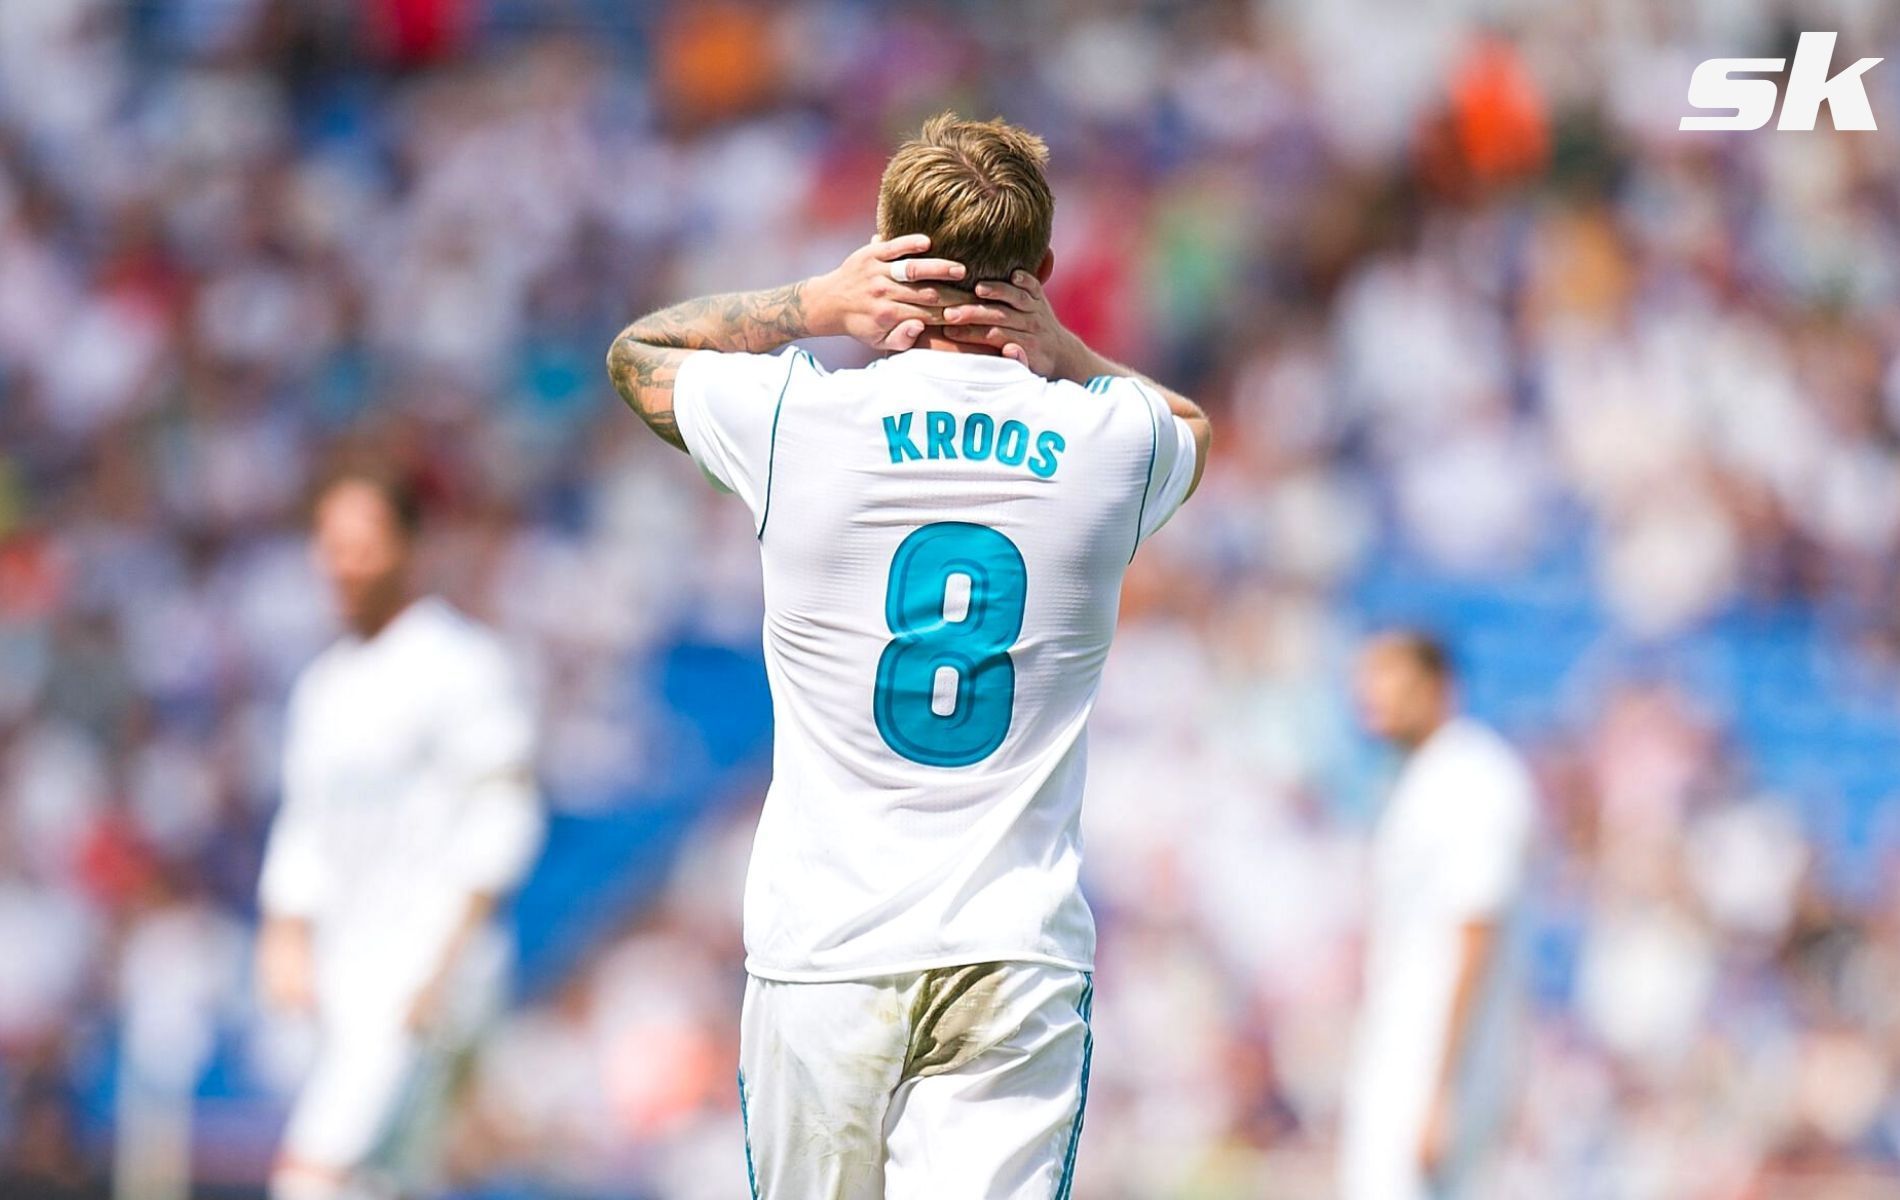 The No.8 jersey will stay synonymous with Toni Kroos for years to come